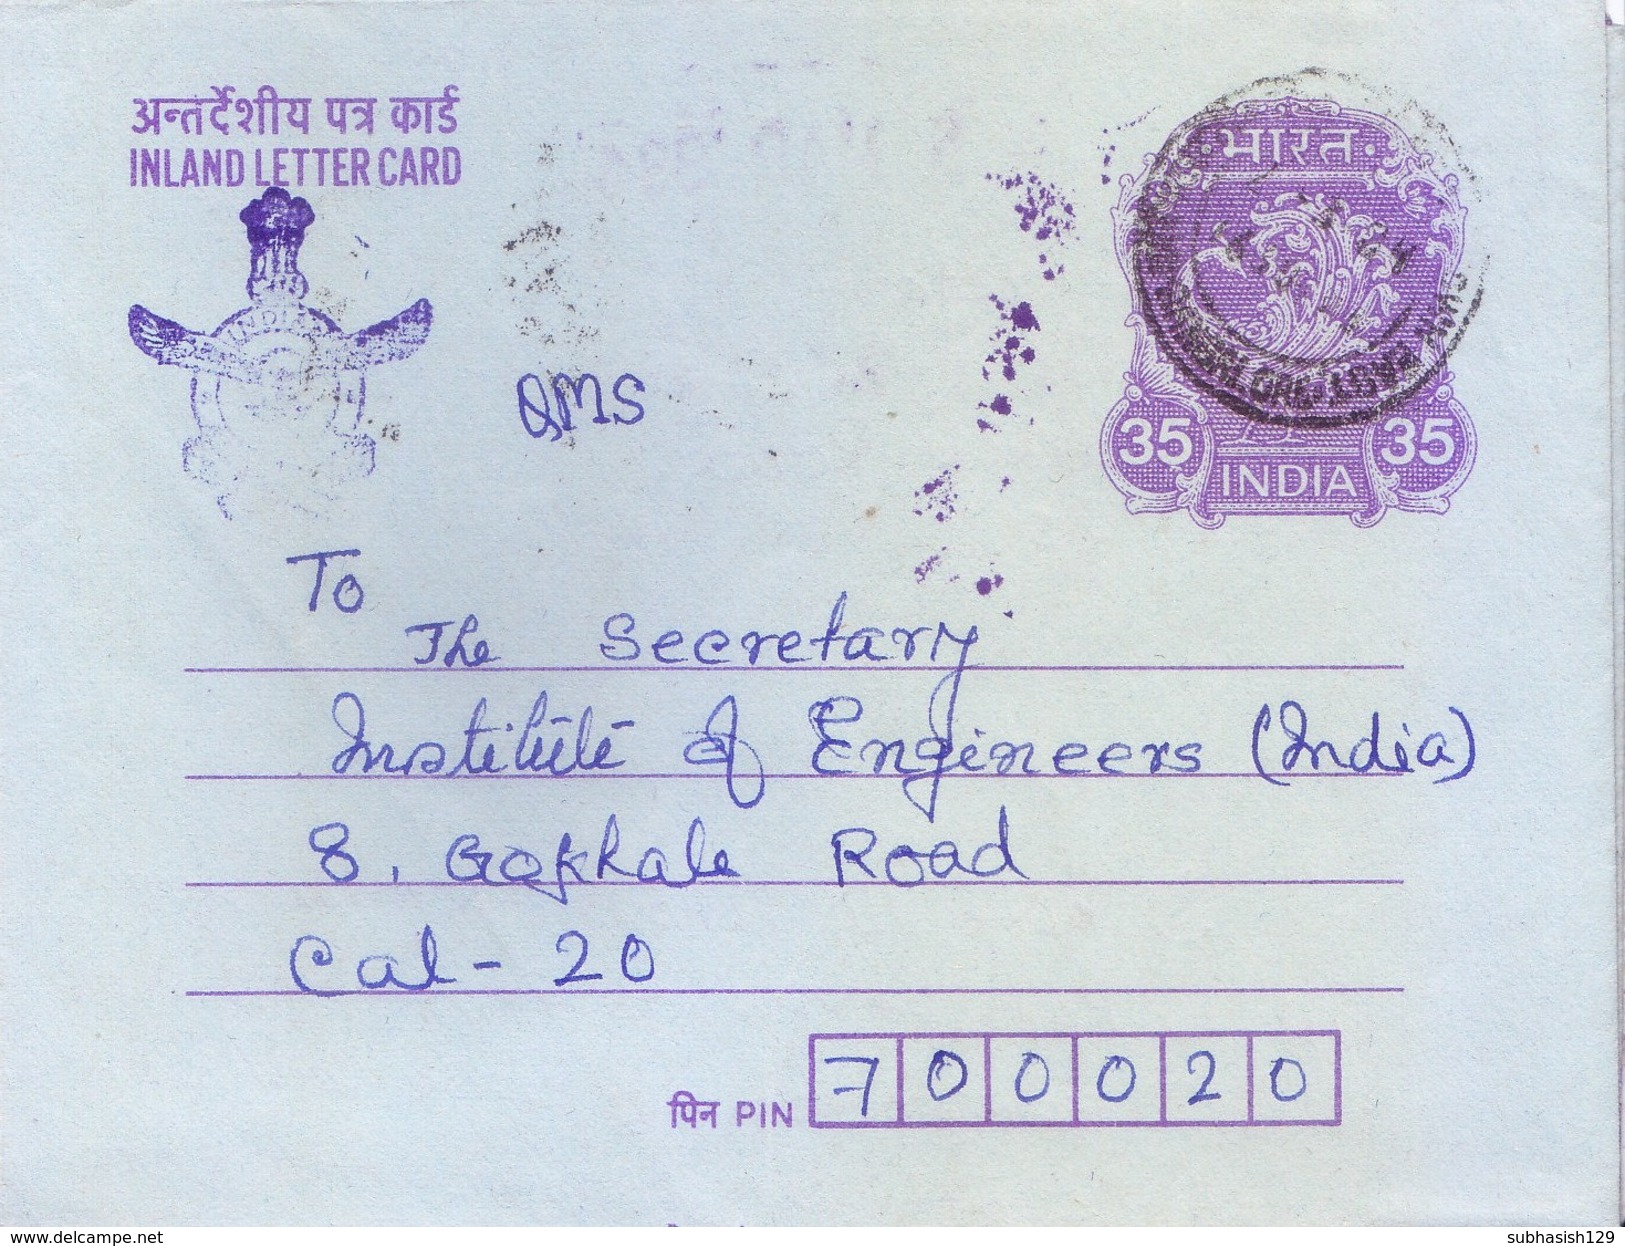 INDIA 1984 USED GANDHI THEME INLAND LETTER CARD DELIVERY THROUGH QUICK MAIL SERVICE, Q. M. S. - INDIAN AIR FORCE EMBLEM - Covers & Documents